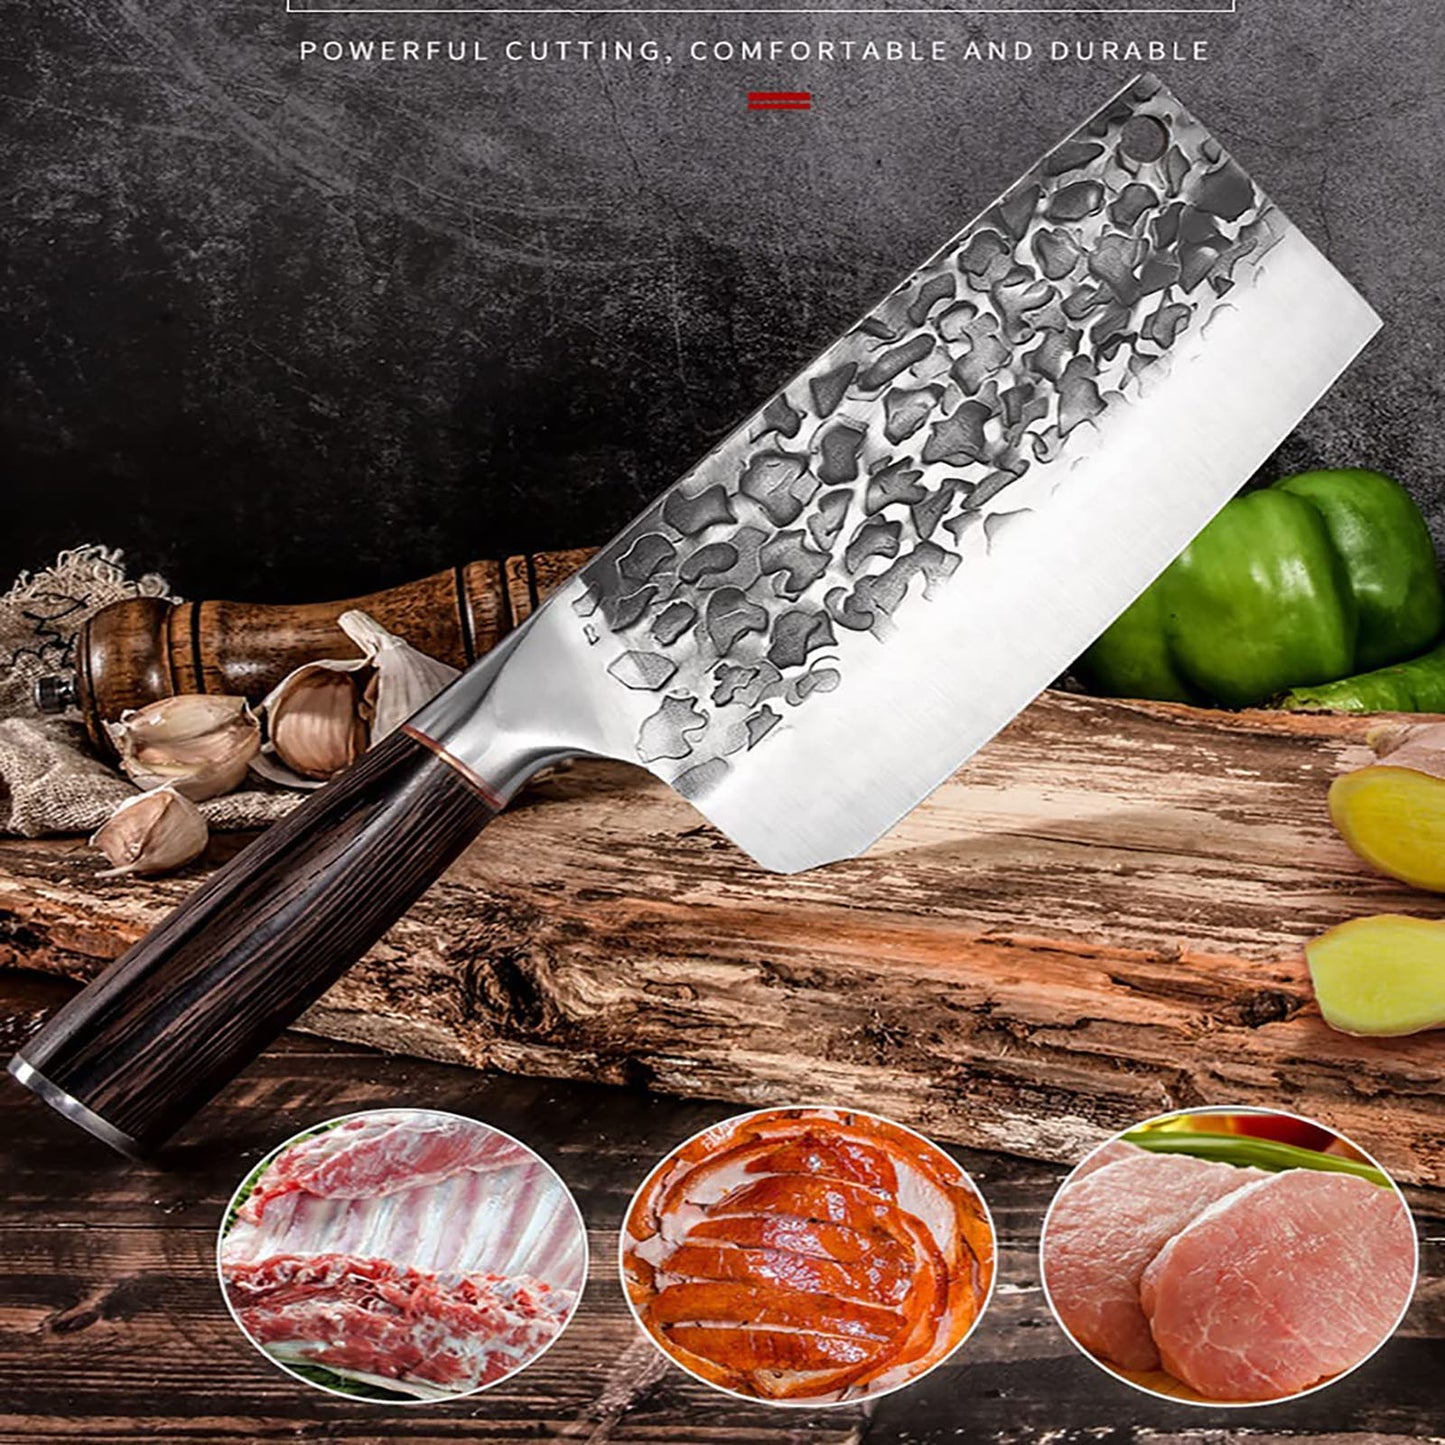 ZENG JIA DAO Meat Cleaver Knife 8 Inch High Carbon Steel With Gift Box